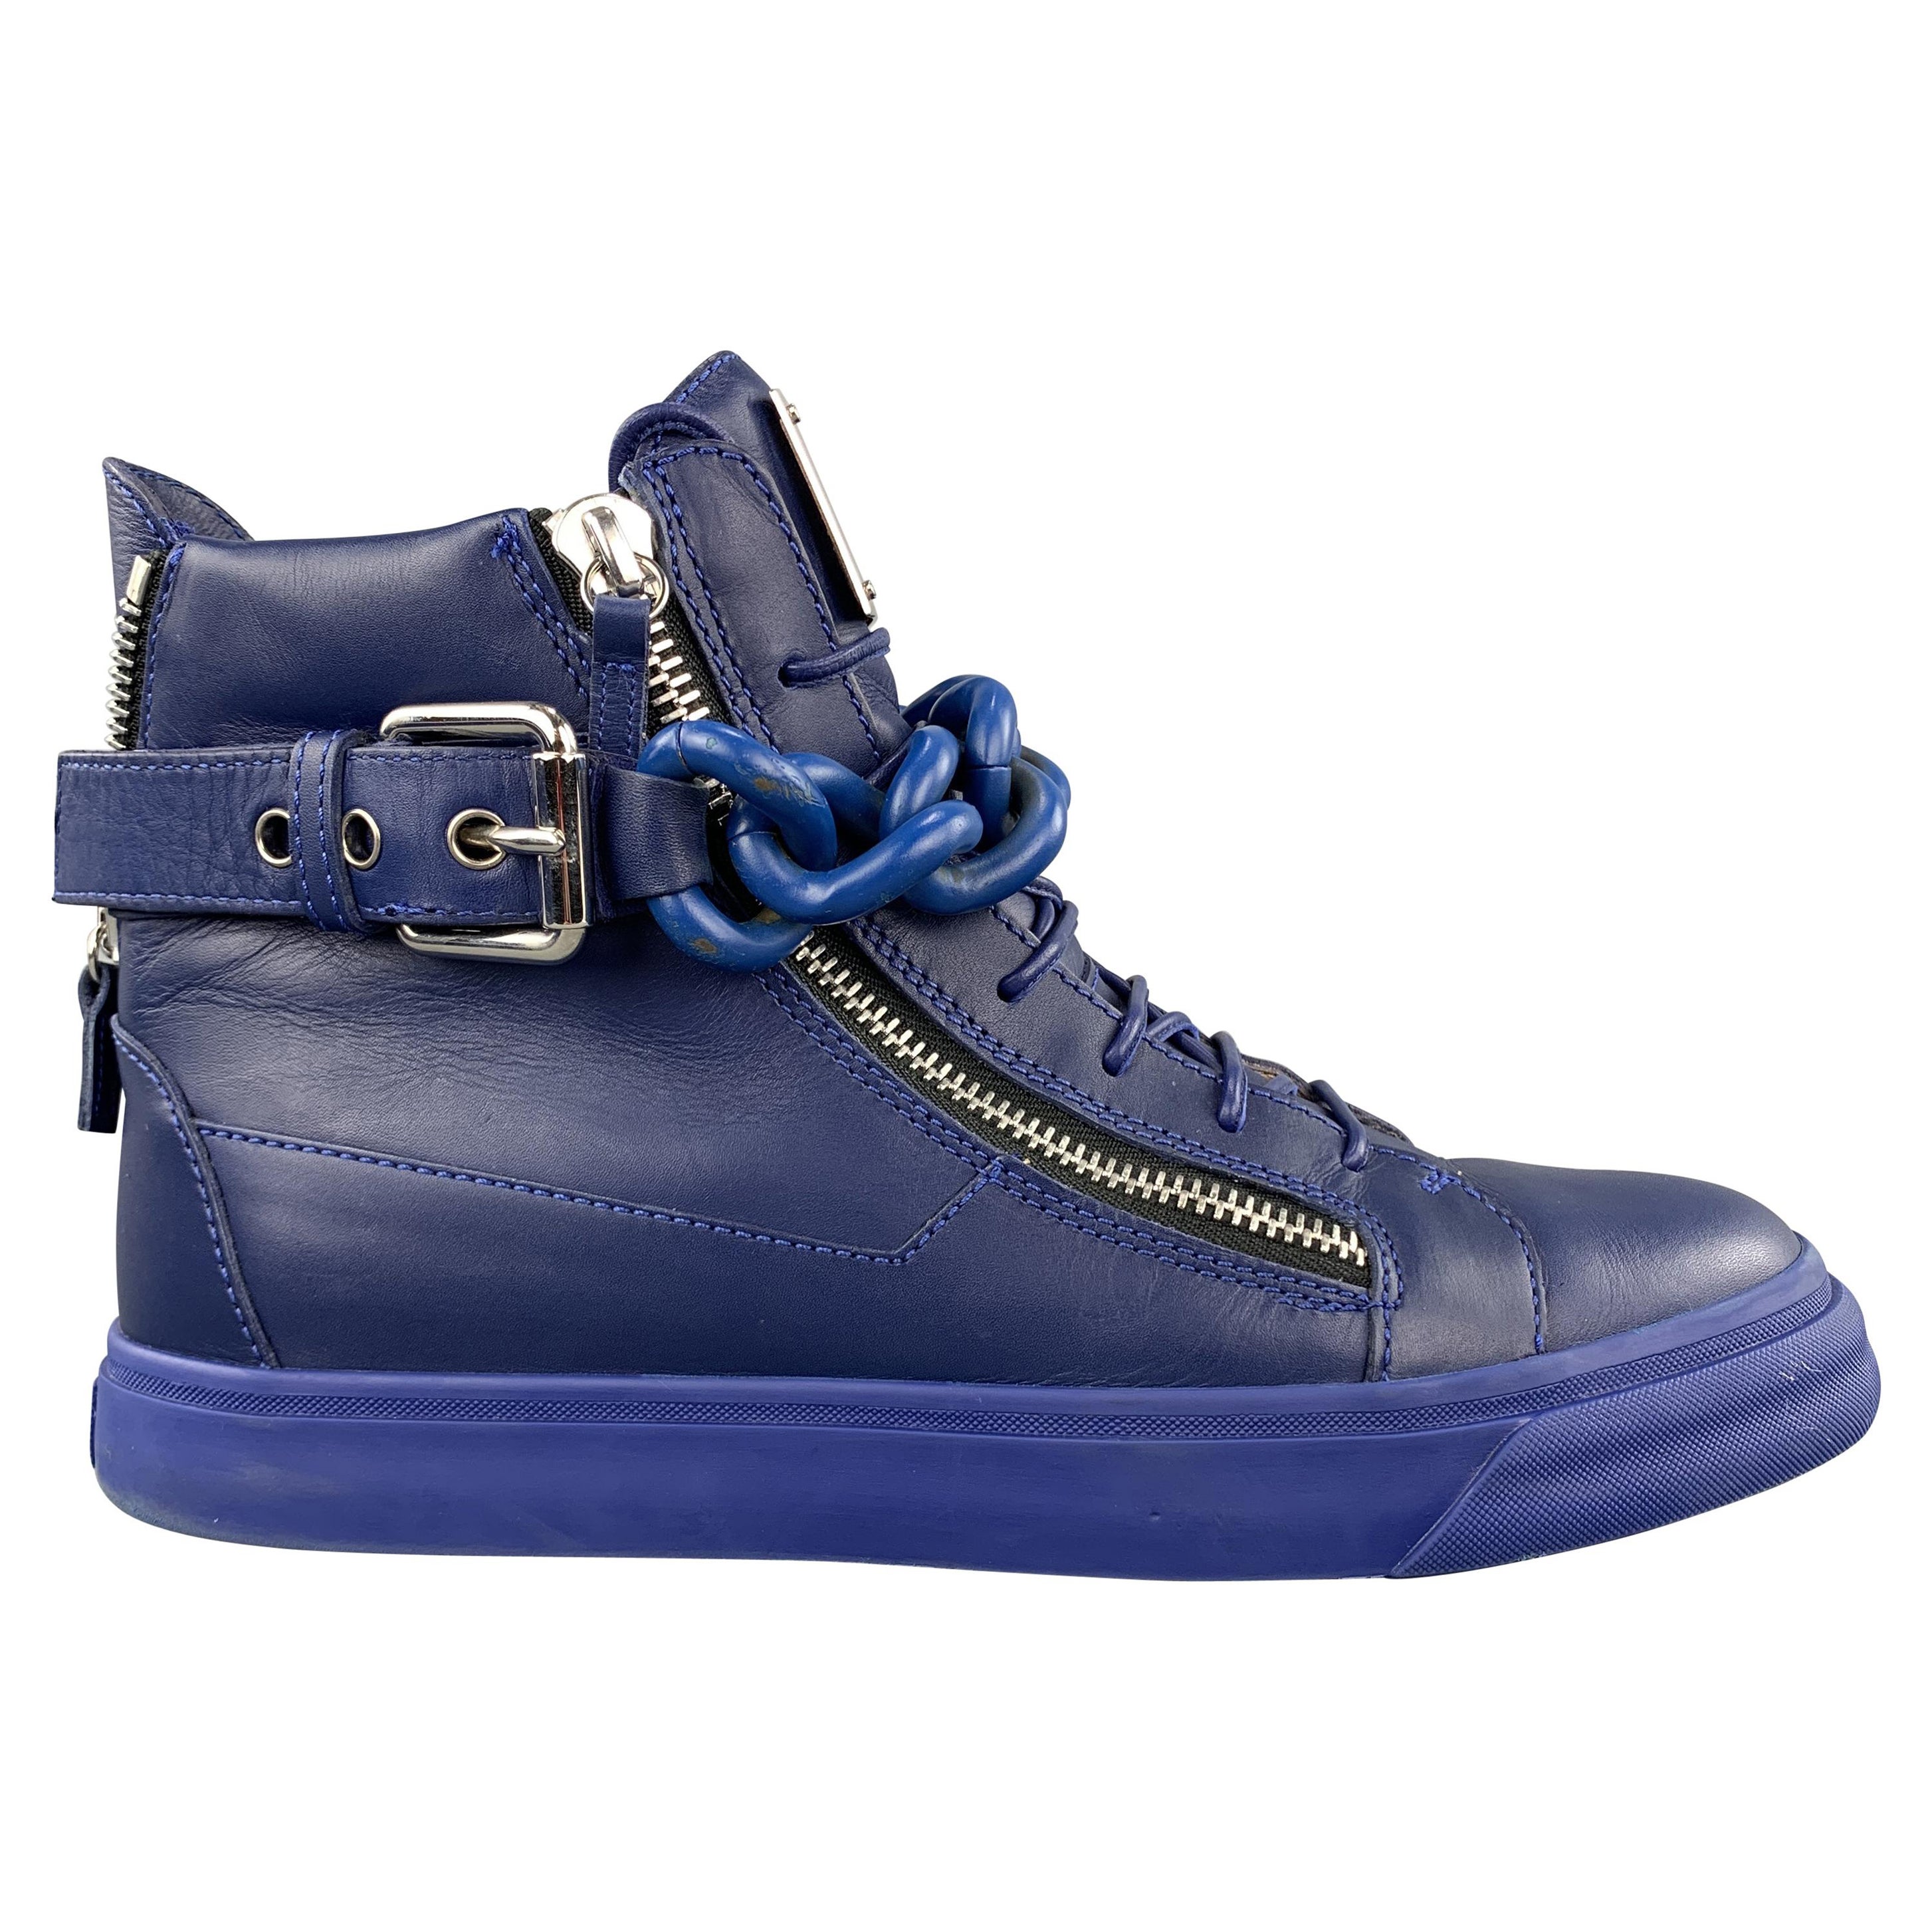 GIUSEPPE ZANOTTI Size 10 Solid Blue Leather High Top Sneakers